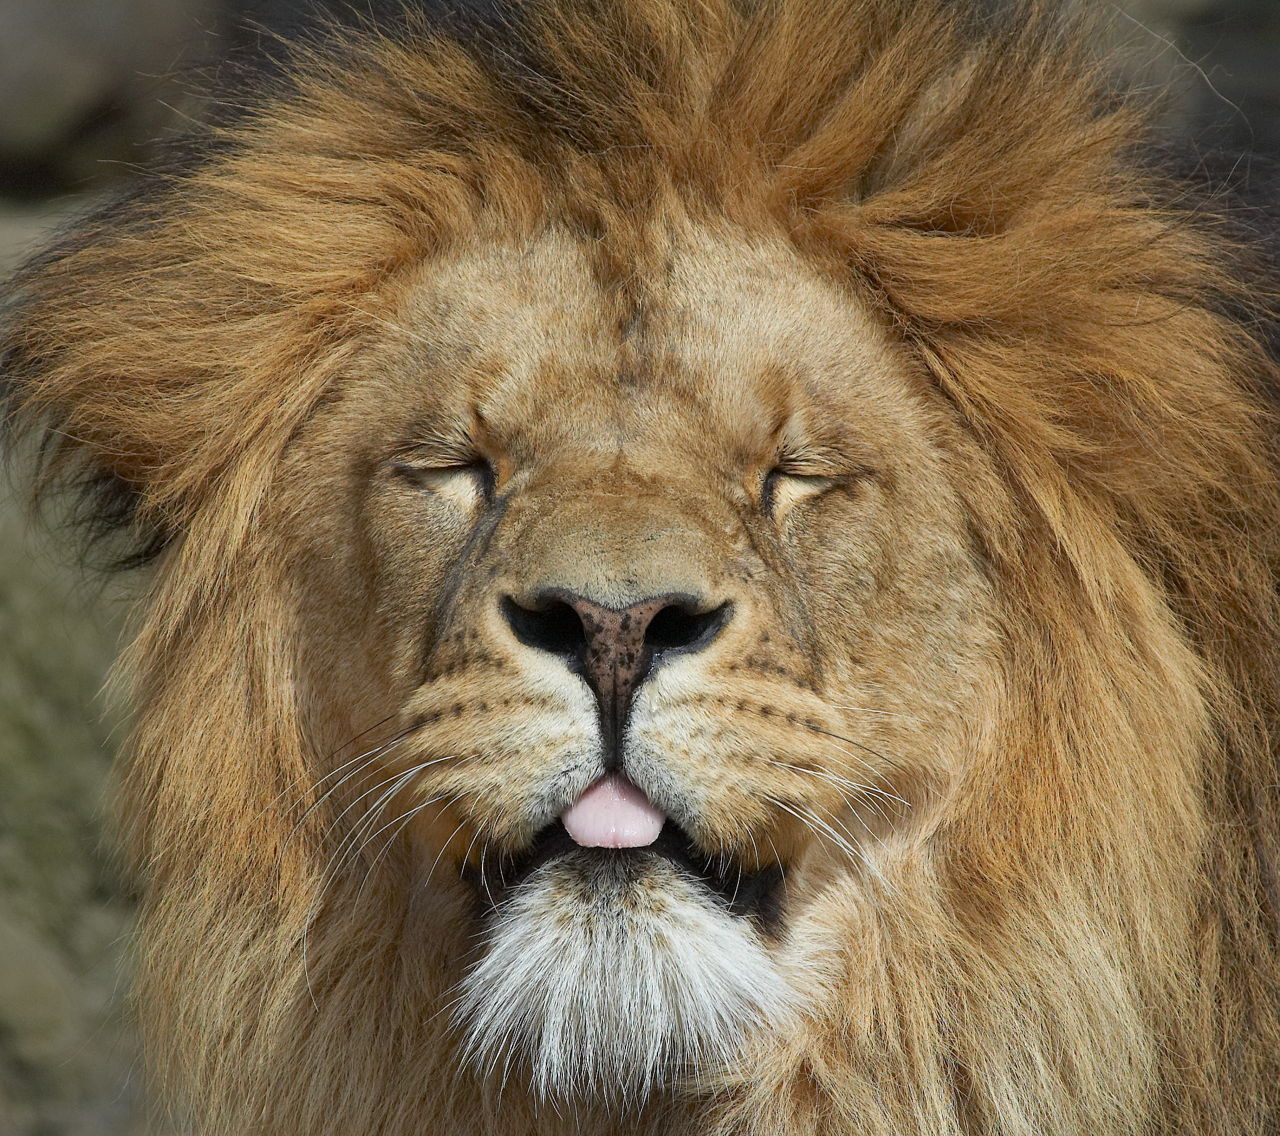 Facts about the Barbary Lion